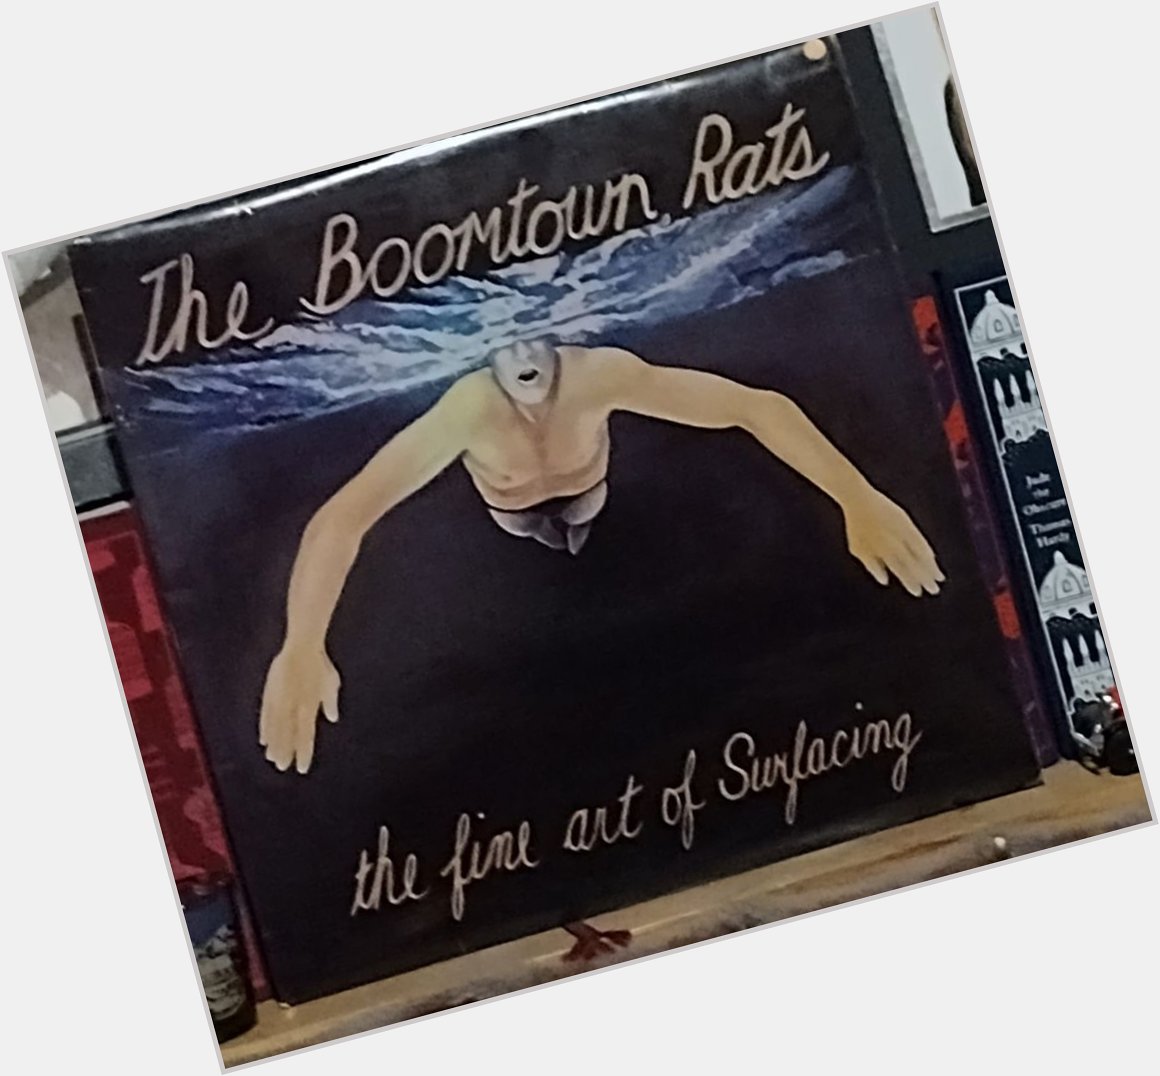 Today\s album listen.....and happy birthday to Bob Geldof....The Boomtown Rats: The Fine Art Of Surfacing. 